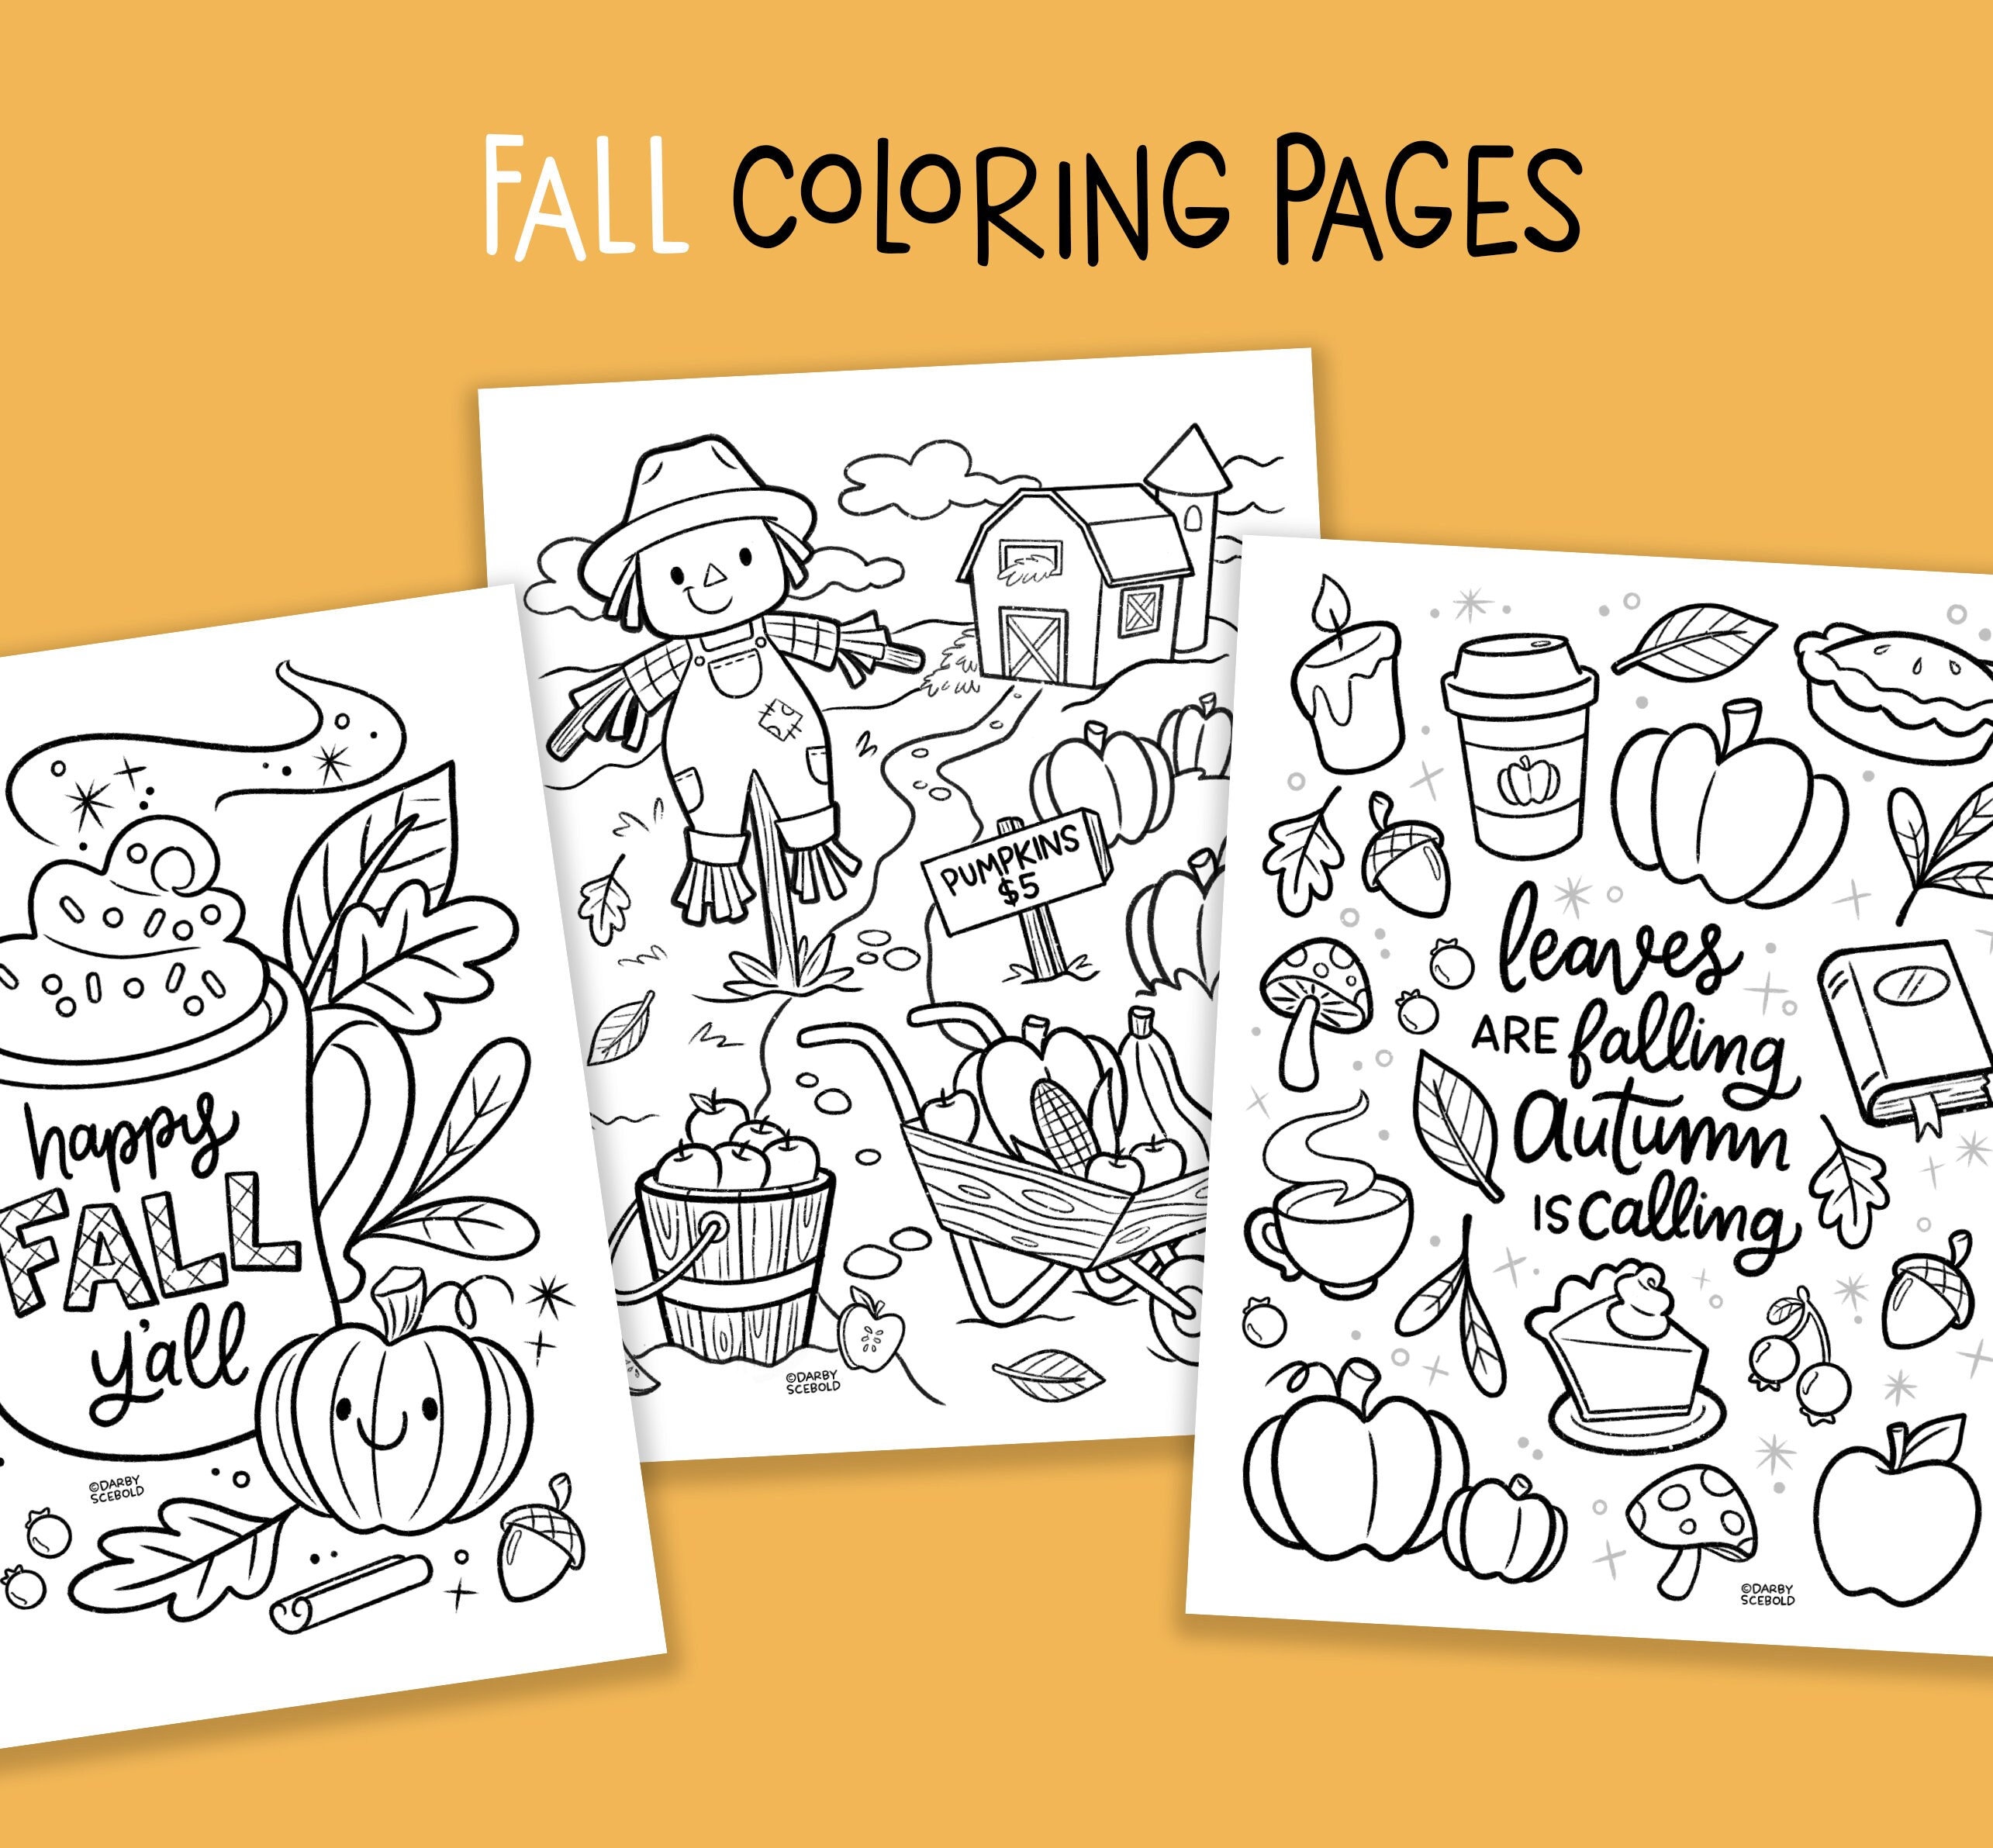 Fall printable coloring pages autumn coloring book for kids fall leaf pumpkin pumpkin patch scarecrow psl lattes pie pdf